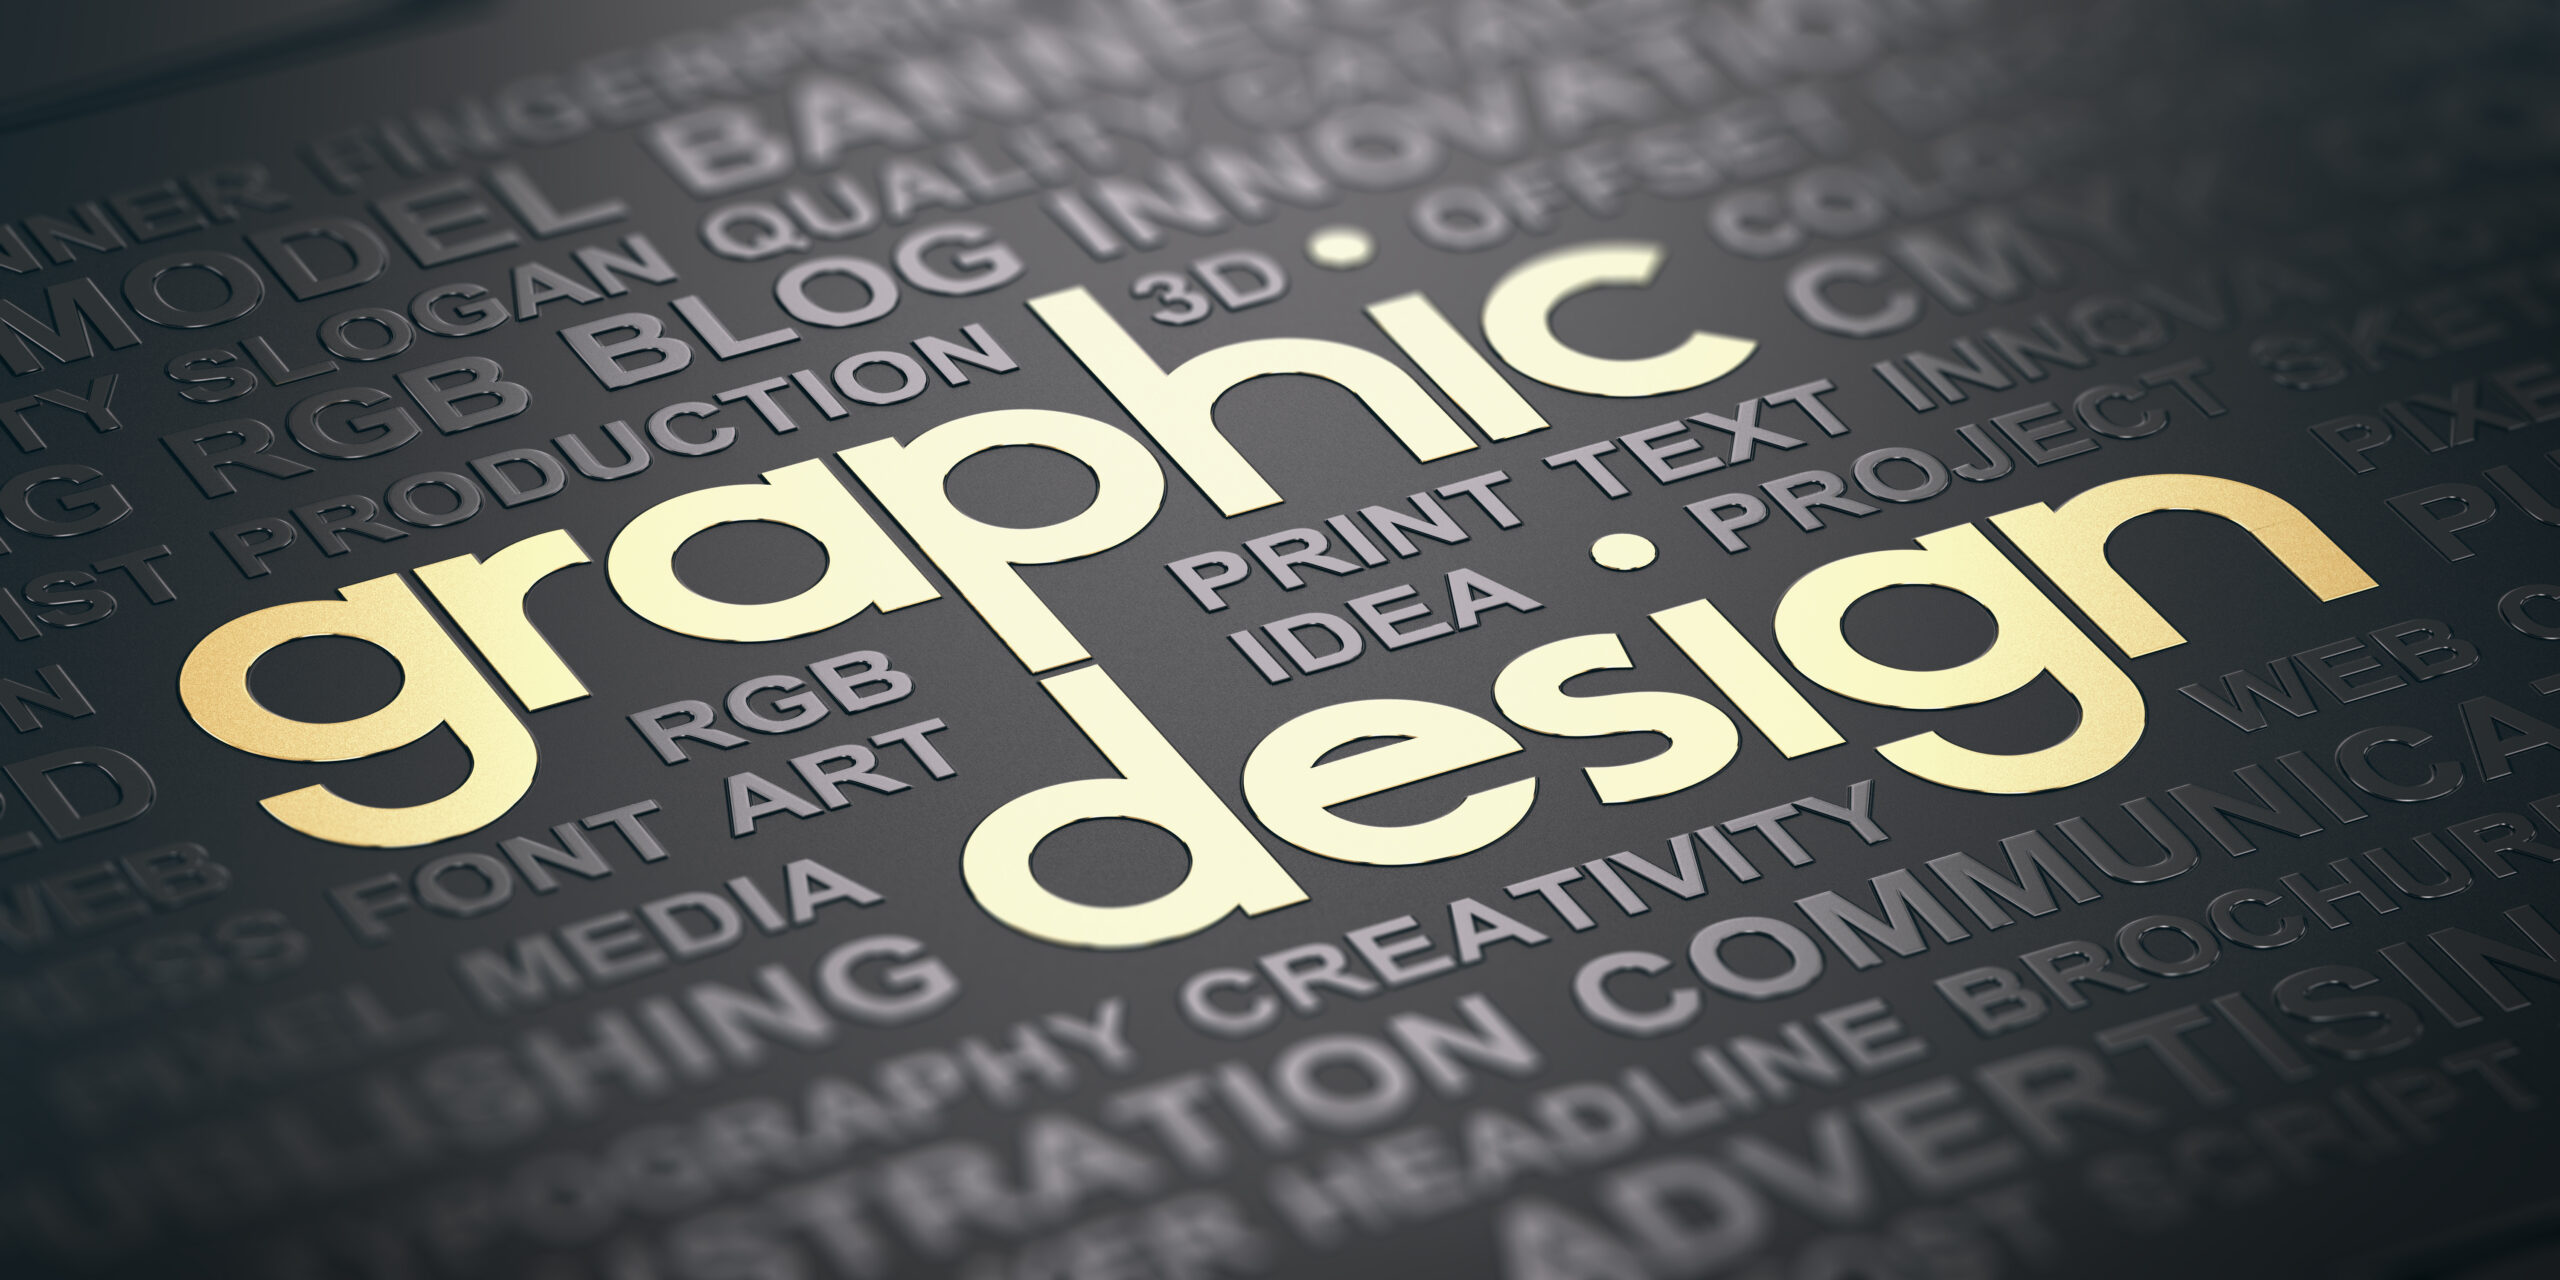 graphic design, branding , and visual appealing designs